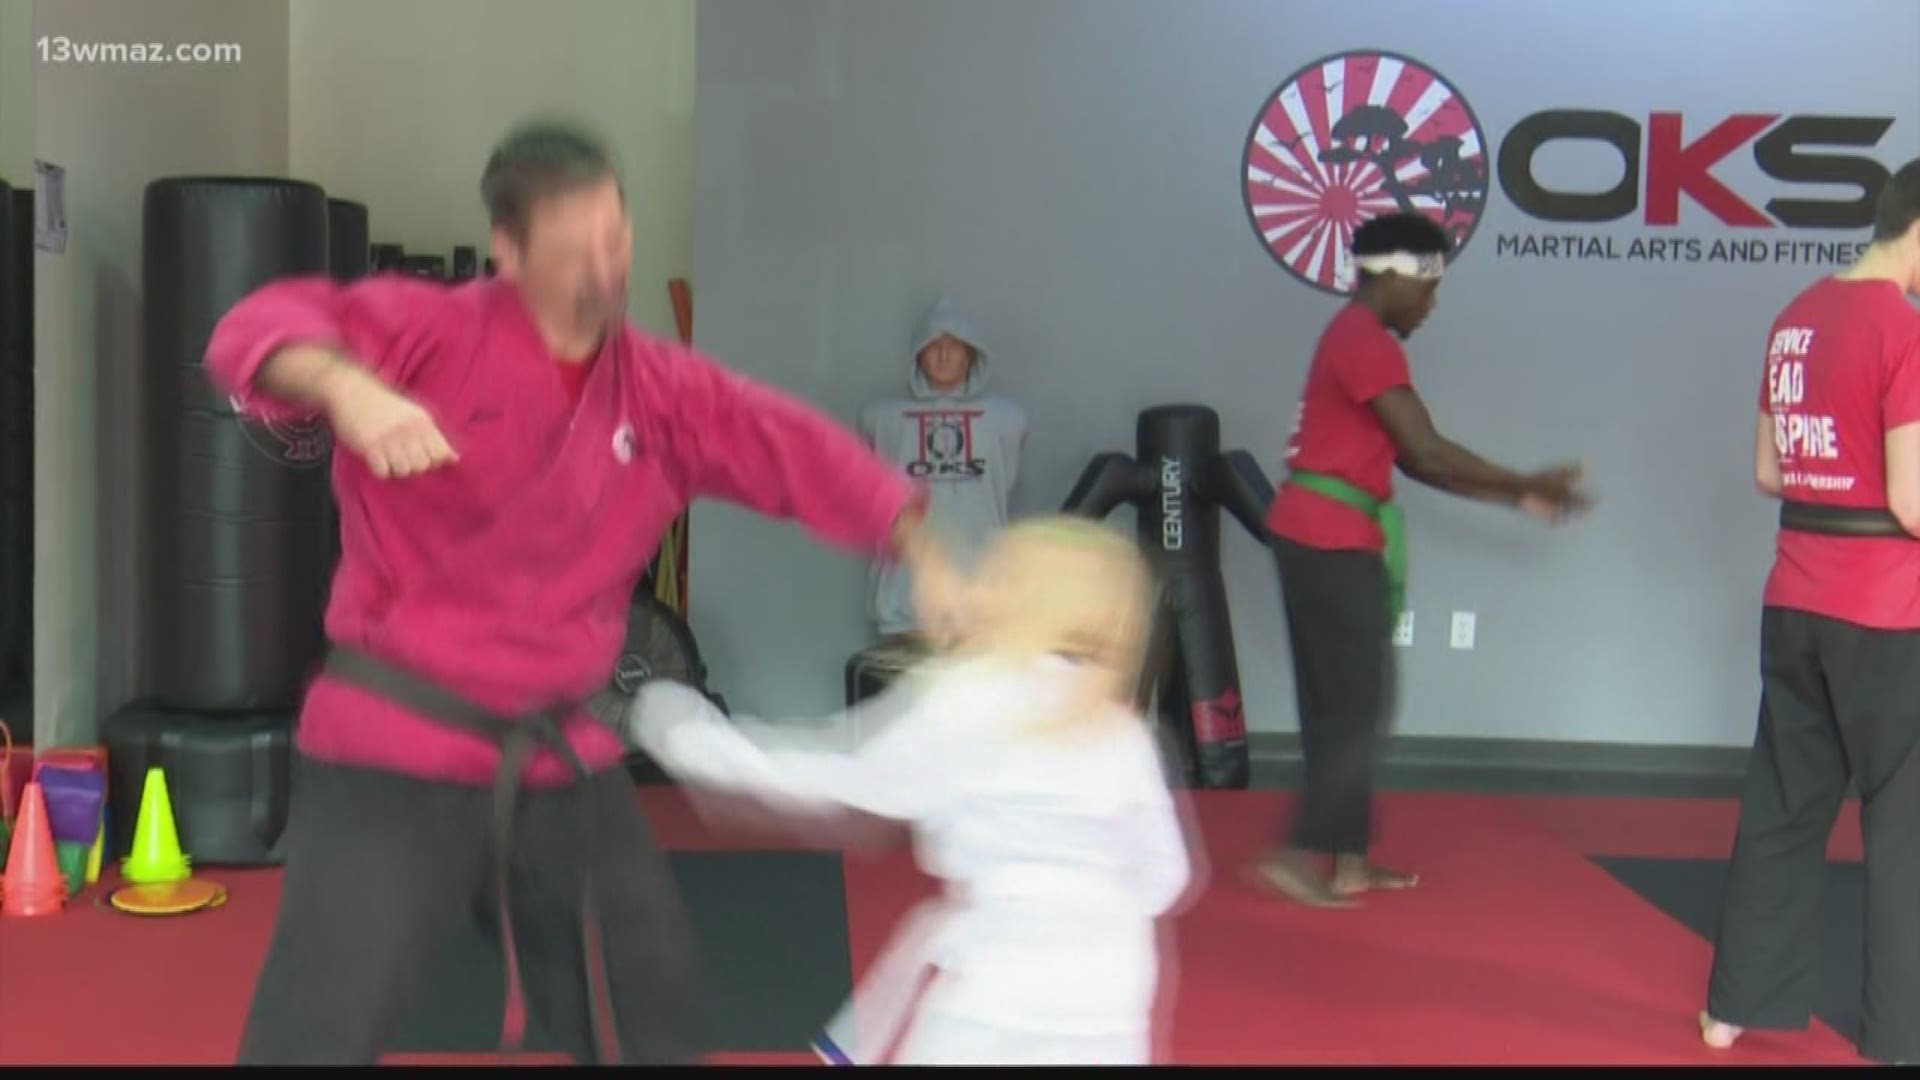 Bullying can take many forms, but some Central Georgia children know they can protect themselves because they've some self-discipline through martial arts